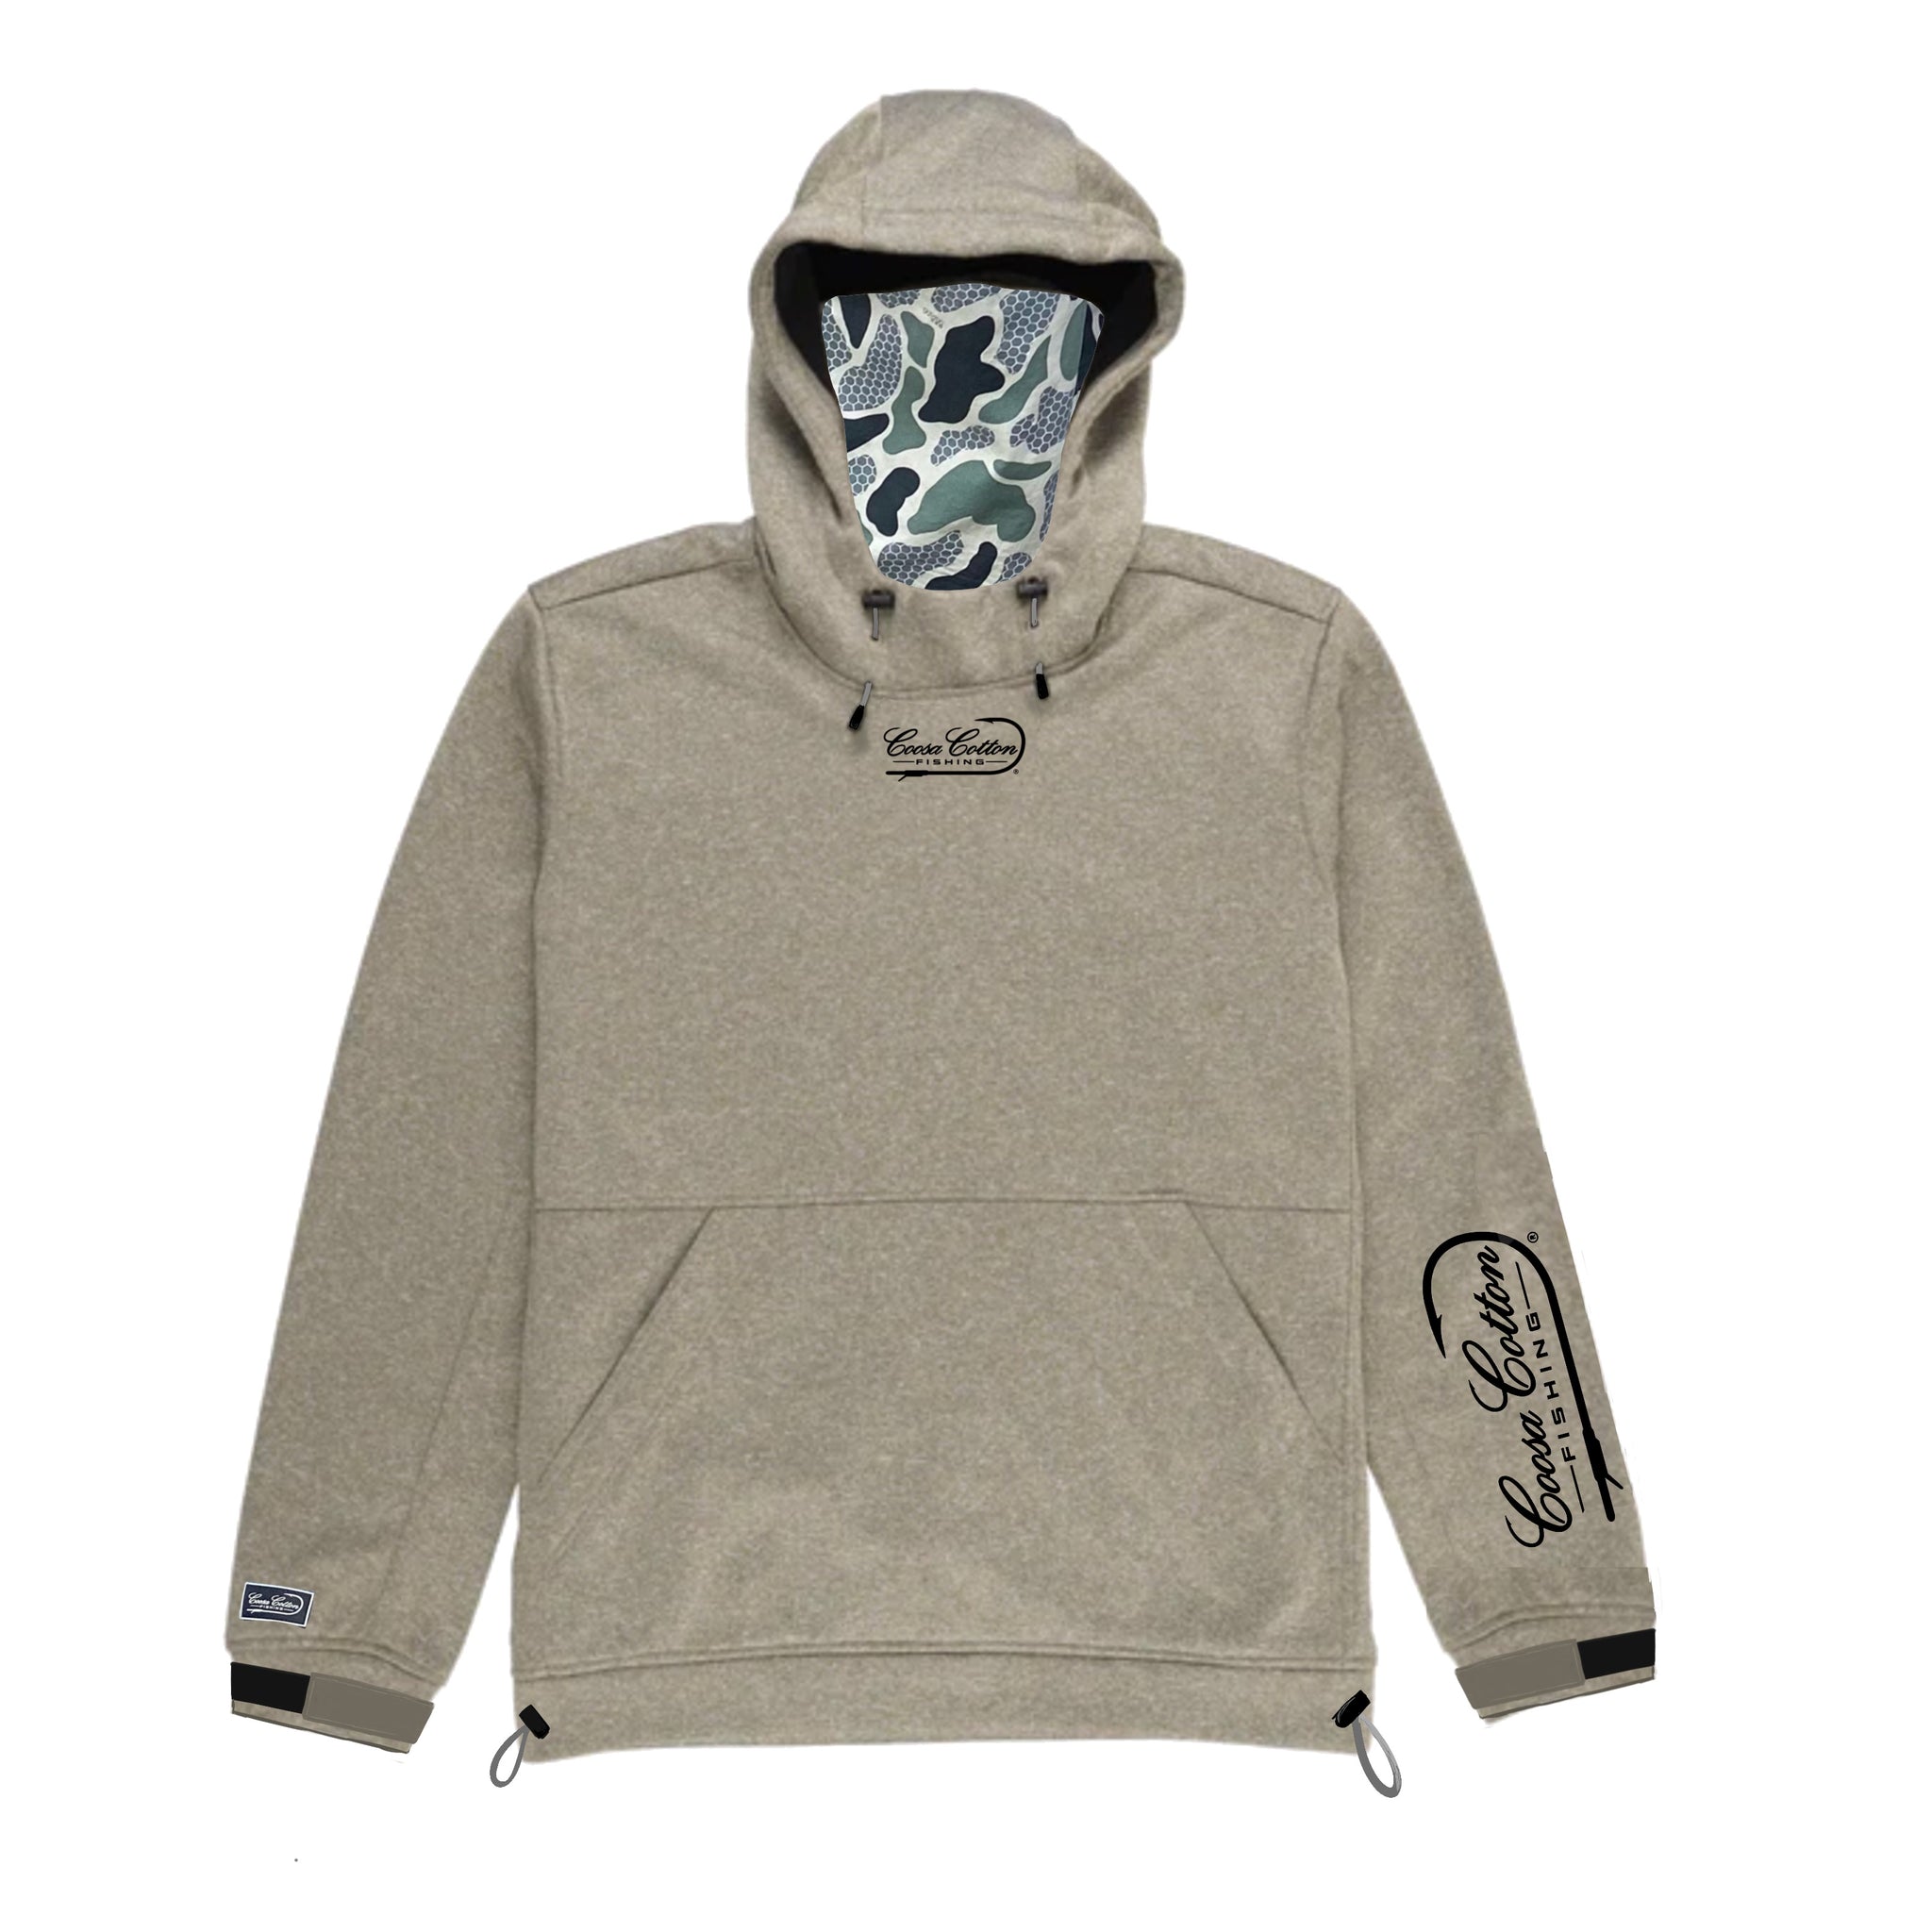 Cold Front Hoodie 3.0 - Khaki